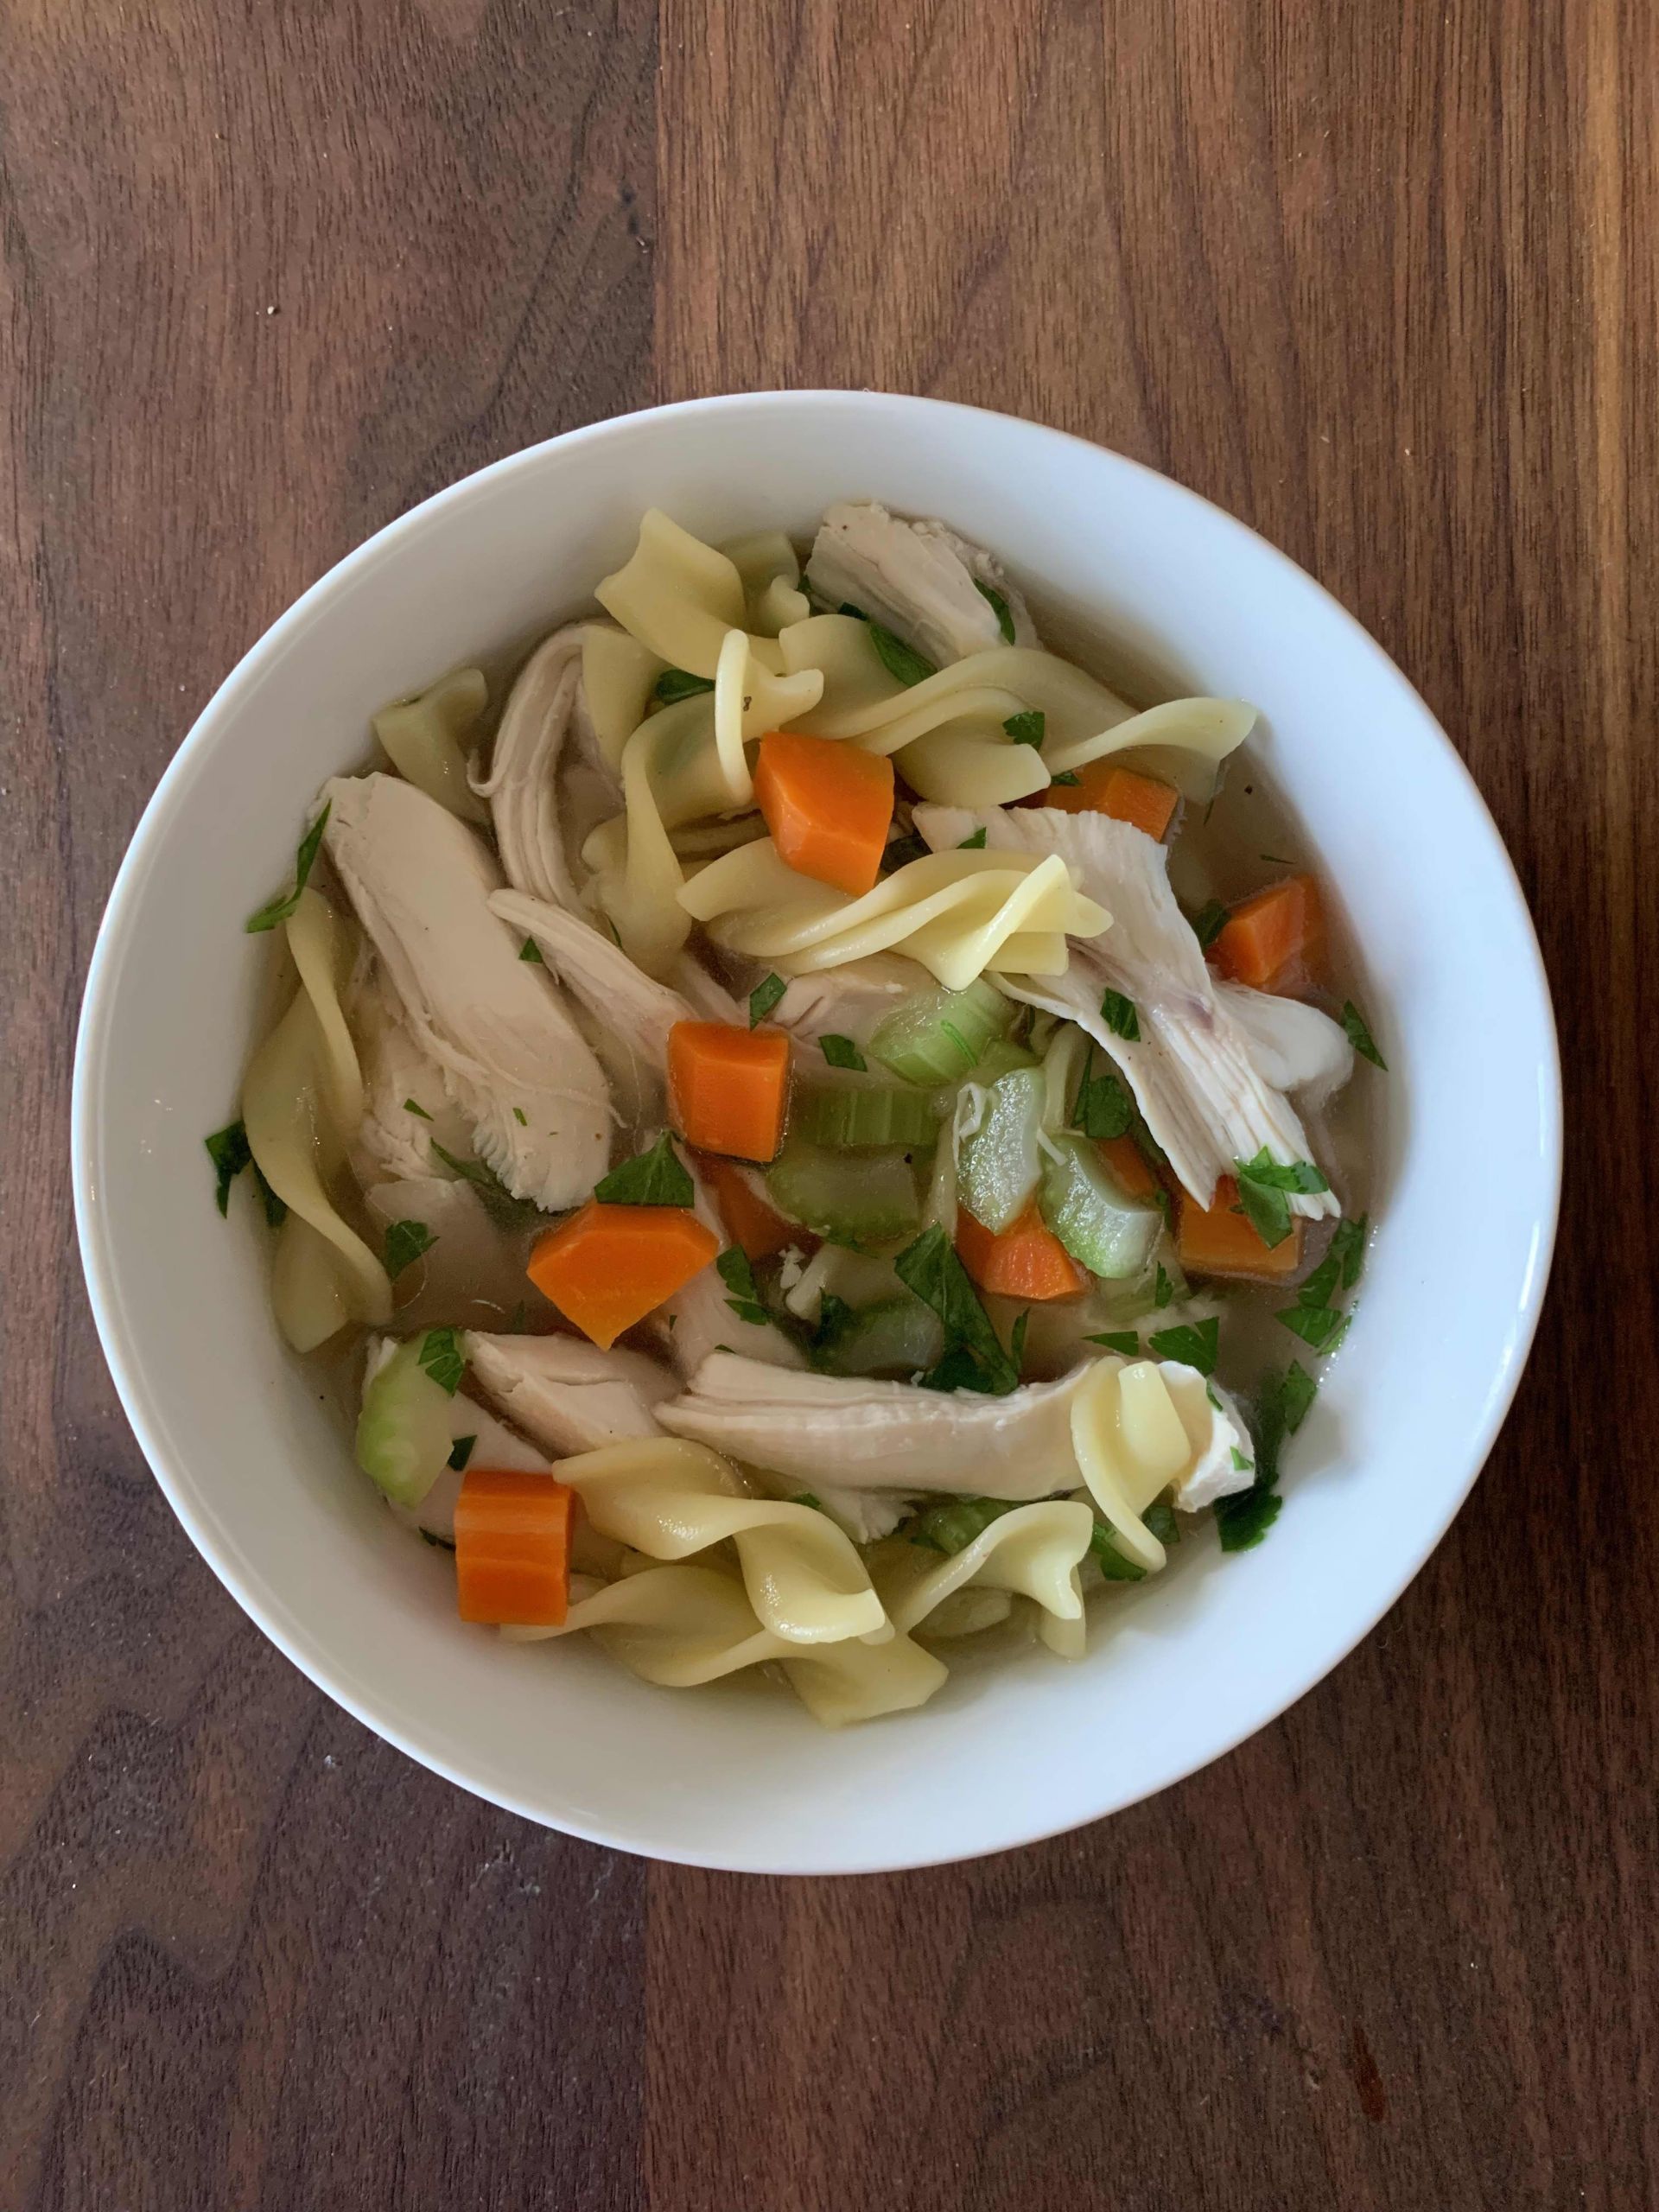 Ina Garten Chicken Noodle Soup
 The e Disappointing Thing About Ina Garten’s Chicken